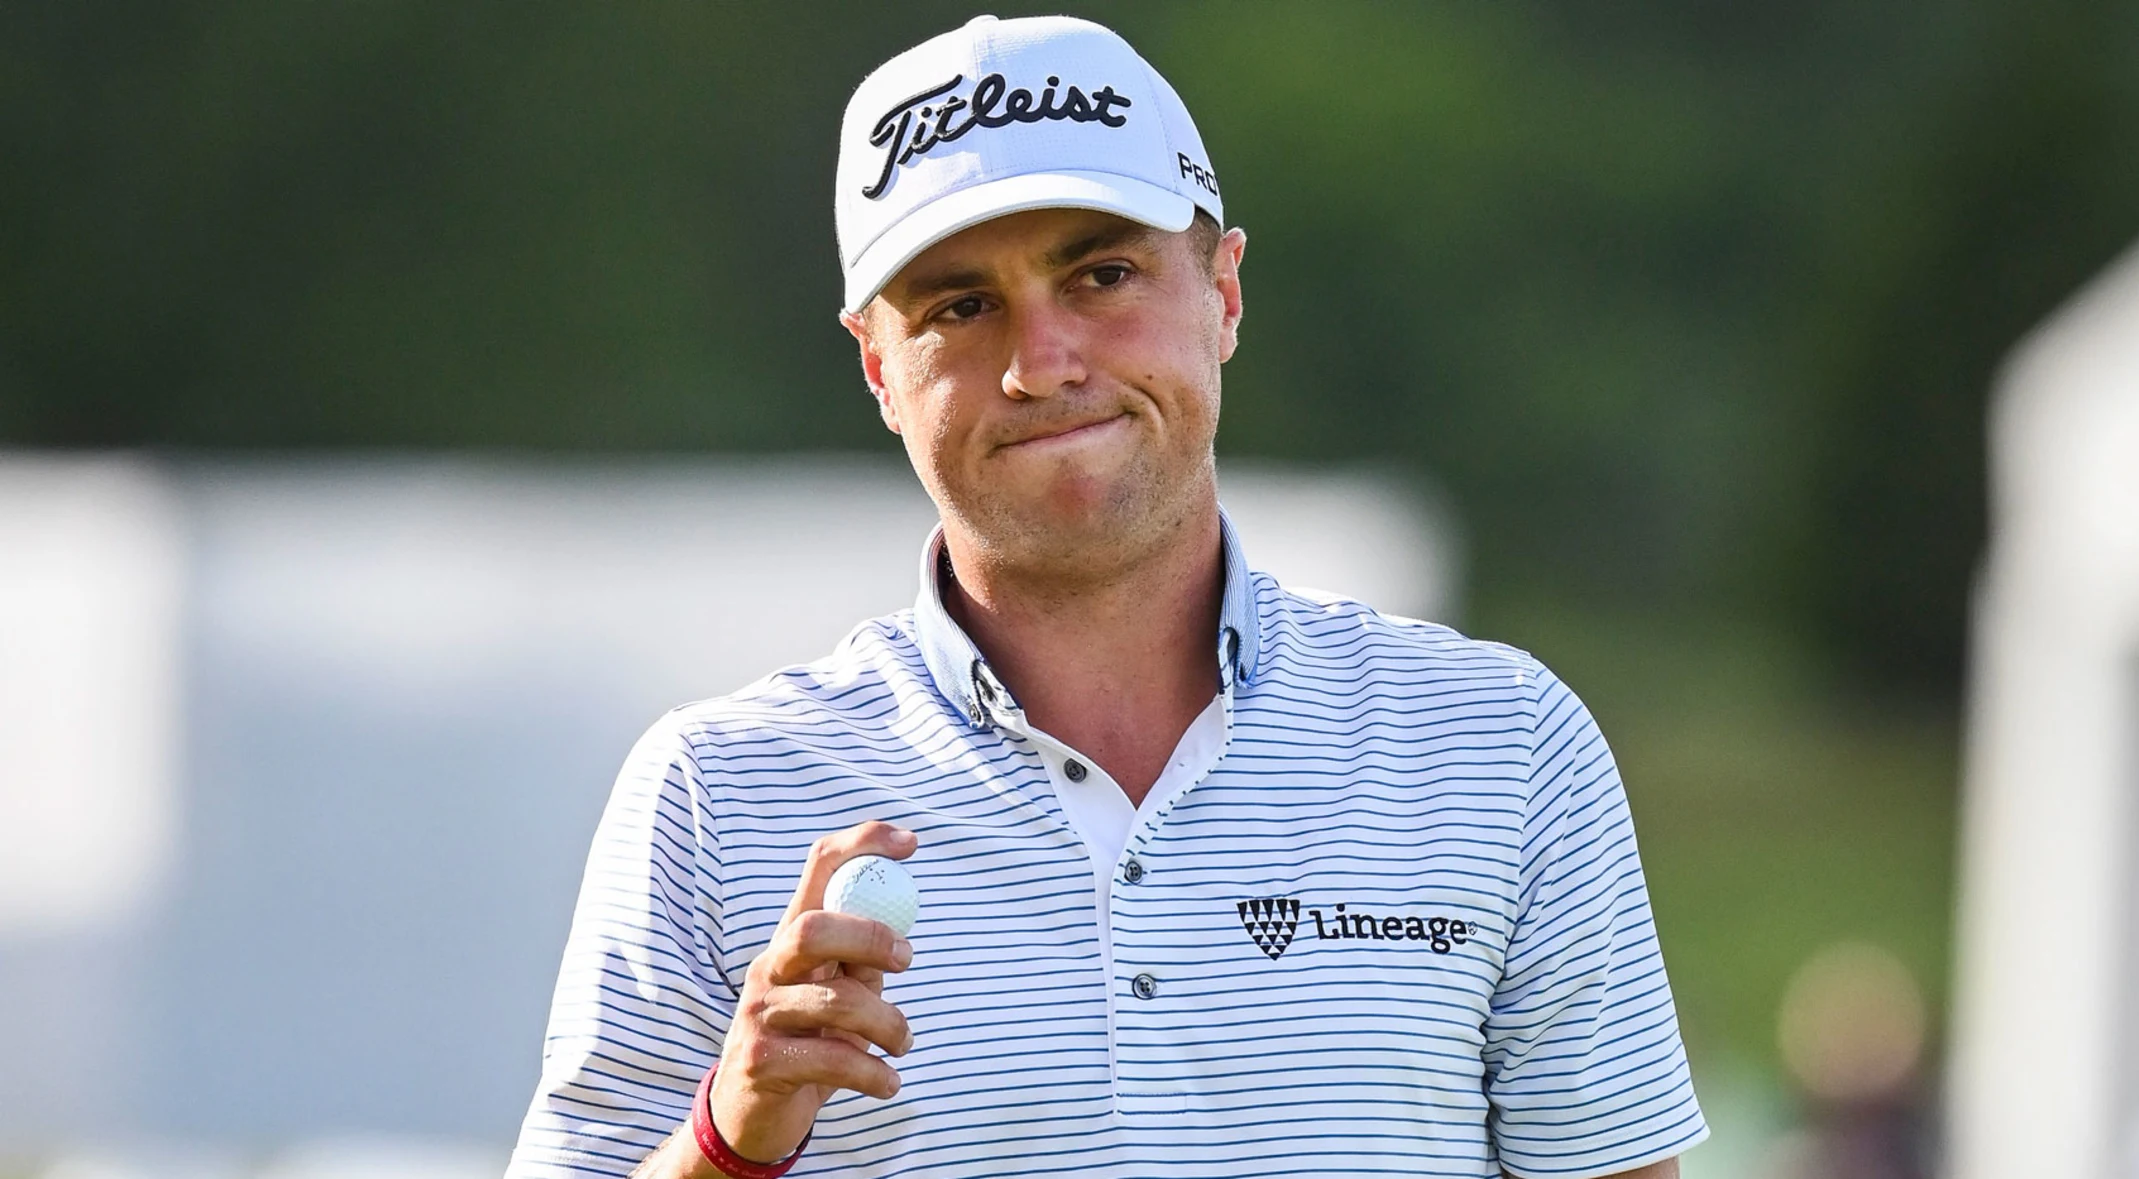 how old is justin thomas